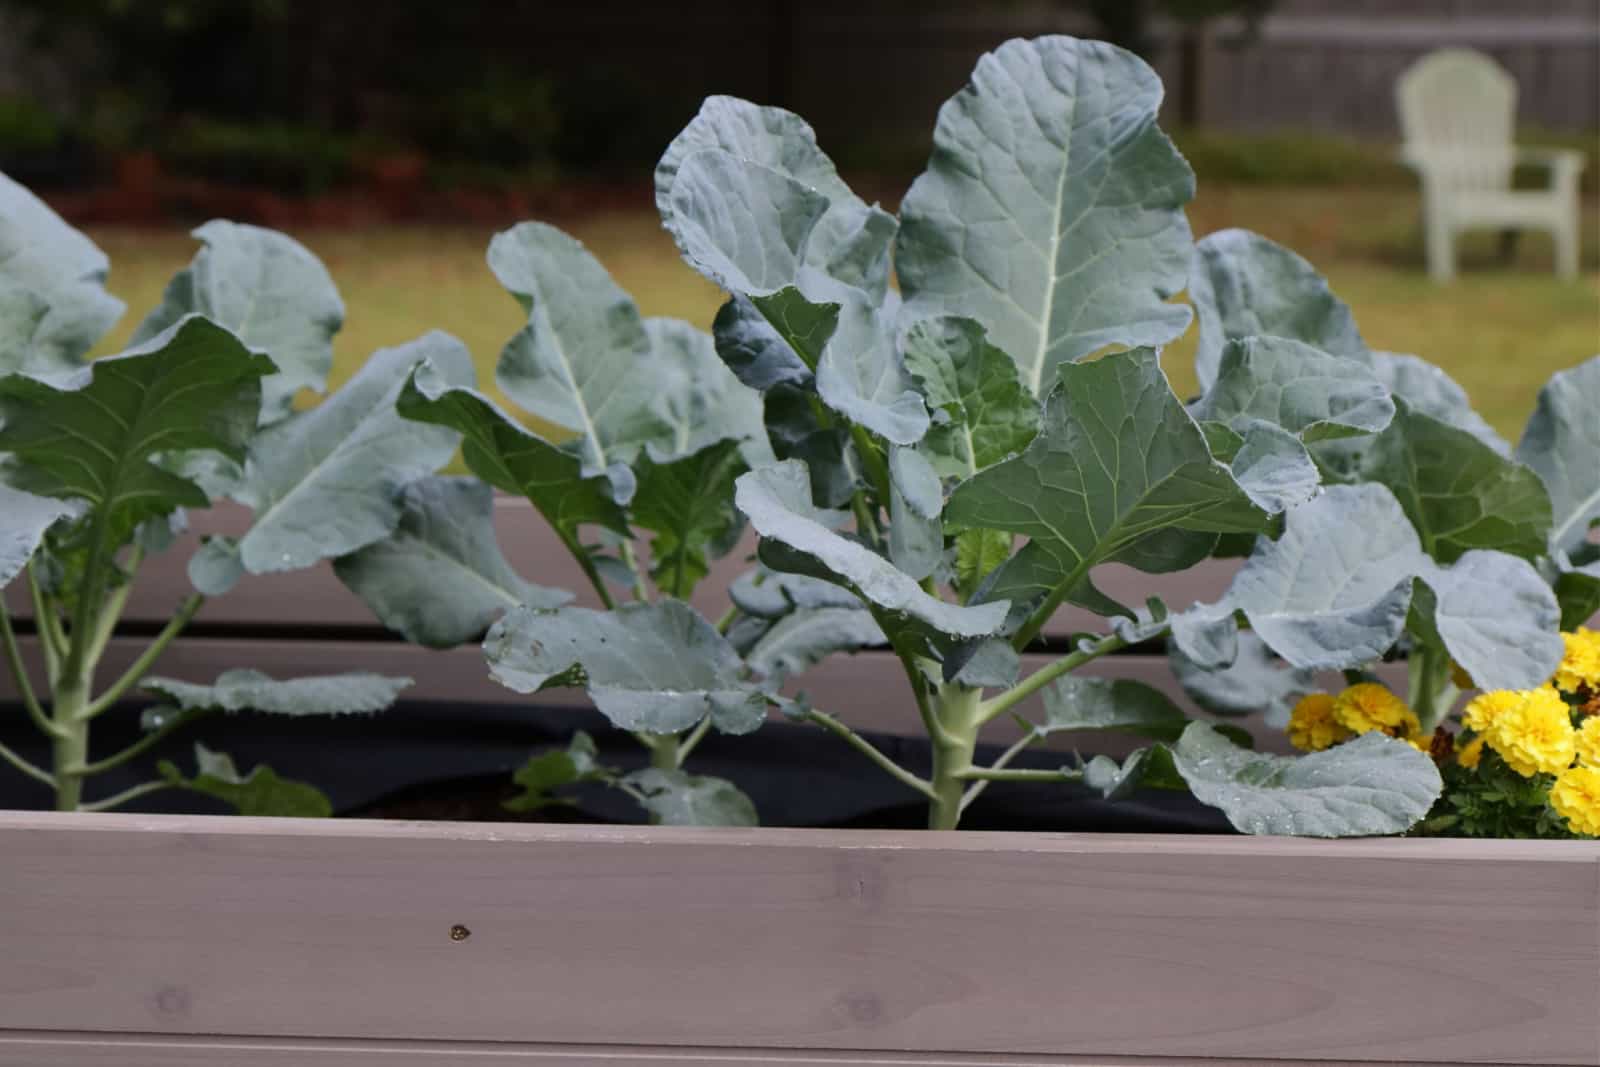 broccoli grown in a container